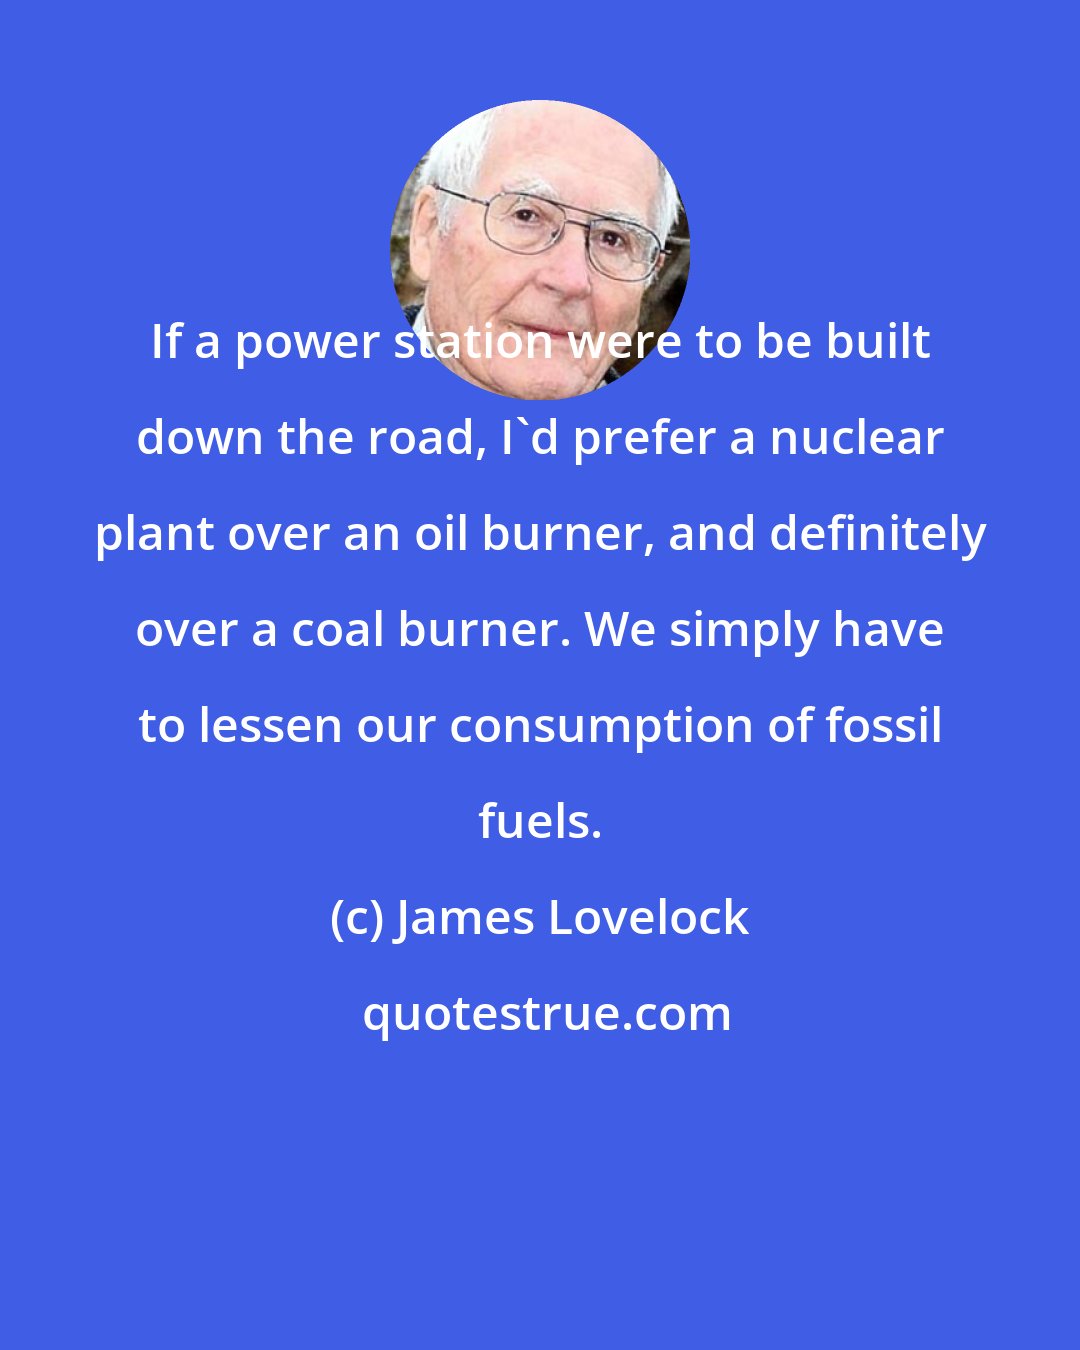 James Lovelock: If a power station were to be built down the road, I'd prefer a nuclear plant over an oil burner, and definitely over a coal burner. We simply have to lessen our consumption of fossil fuels.